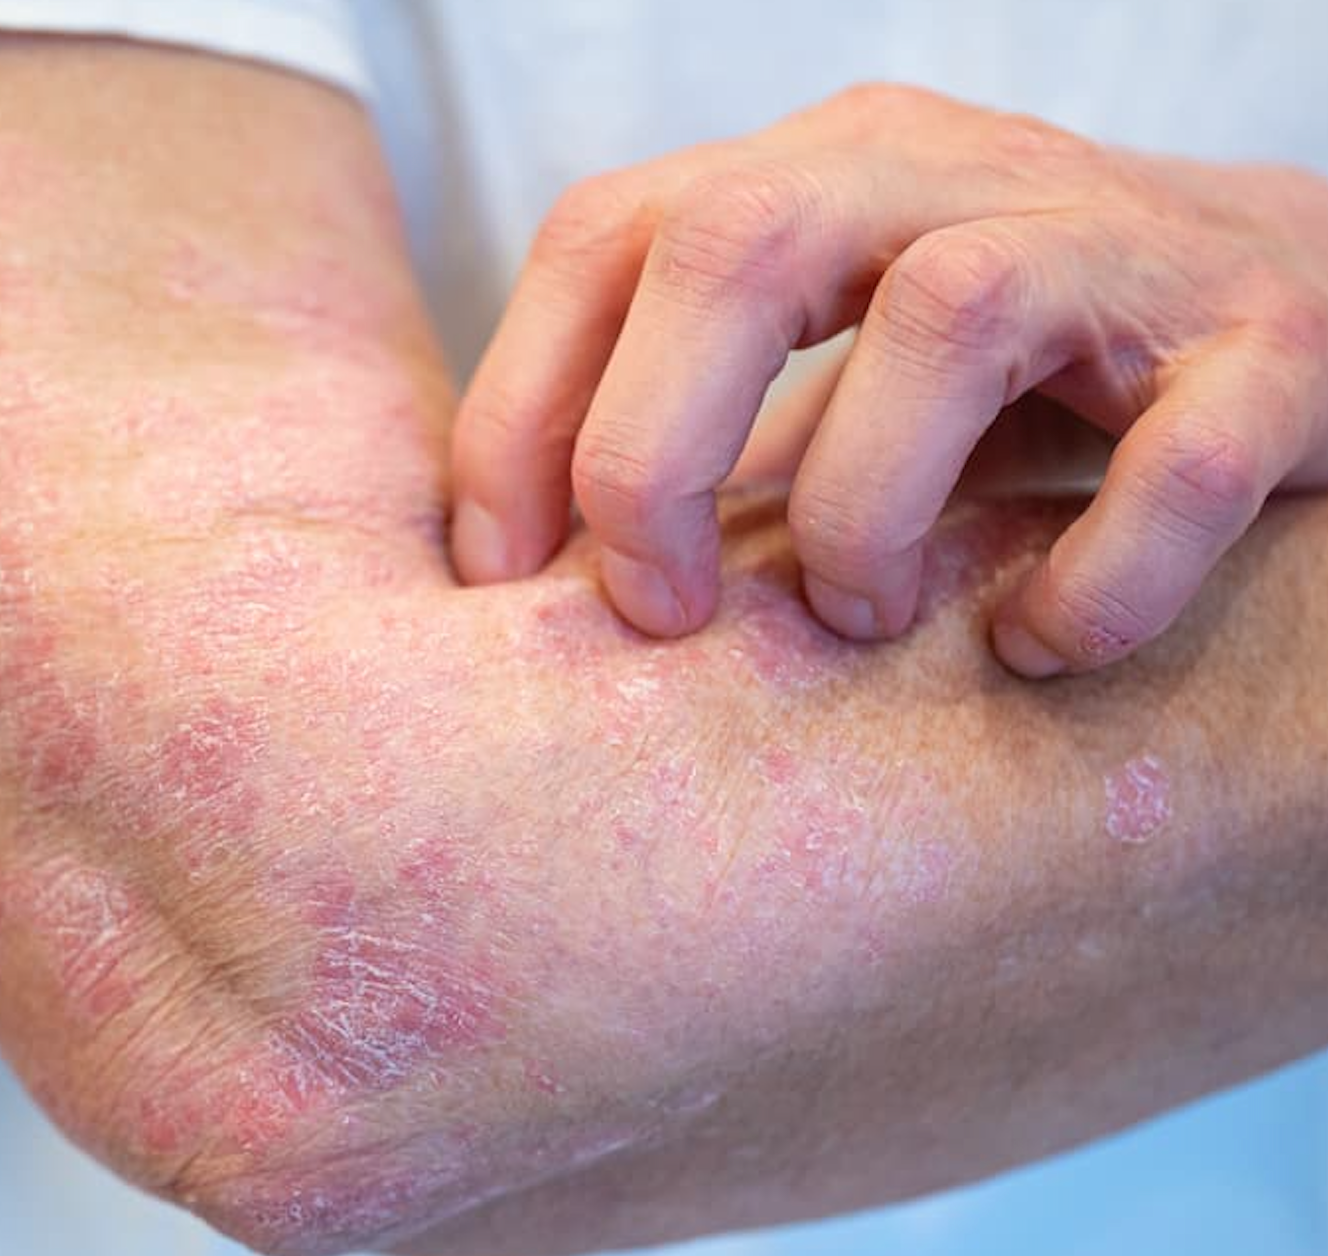 Higher Risk of Autoimmune Diseases Among Patients with Psoriatic Disease